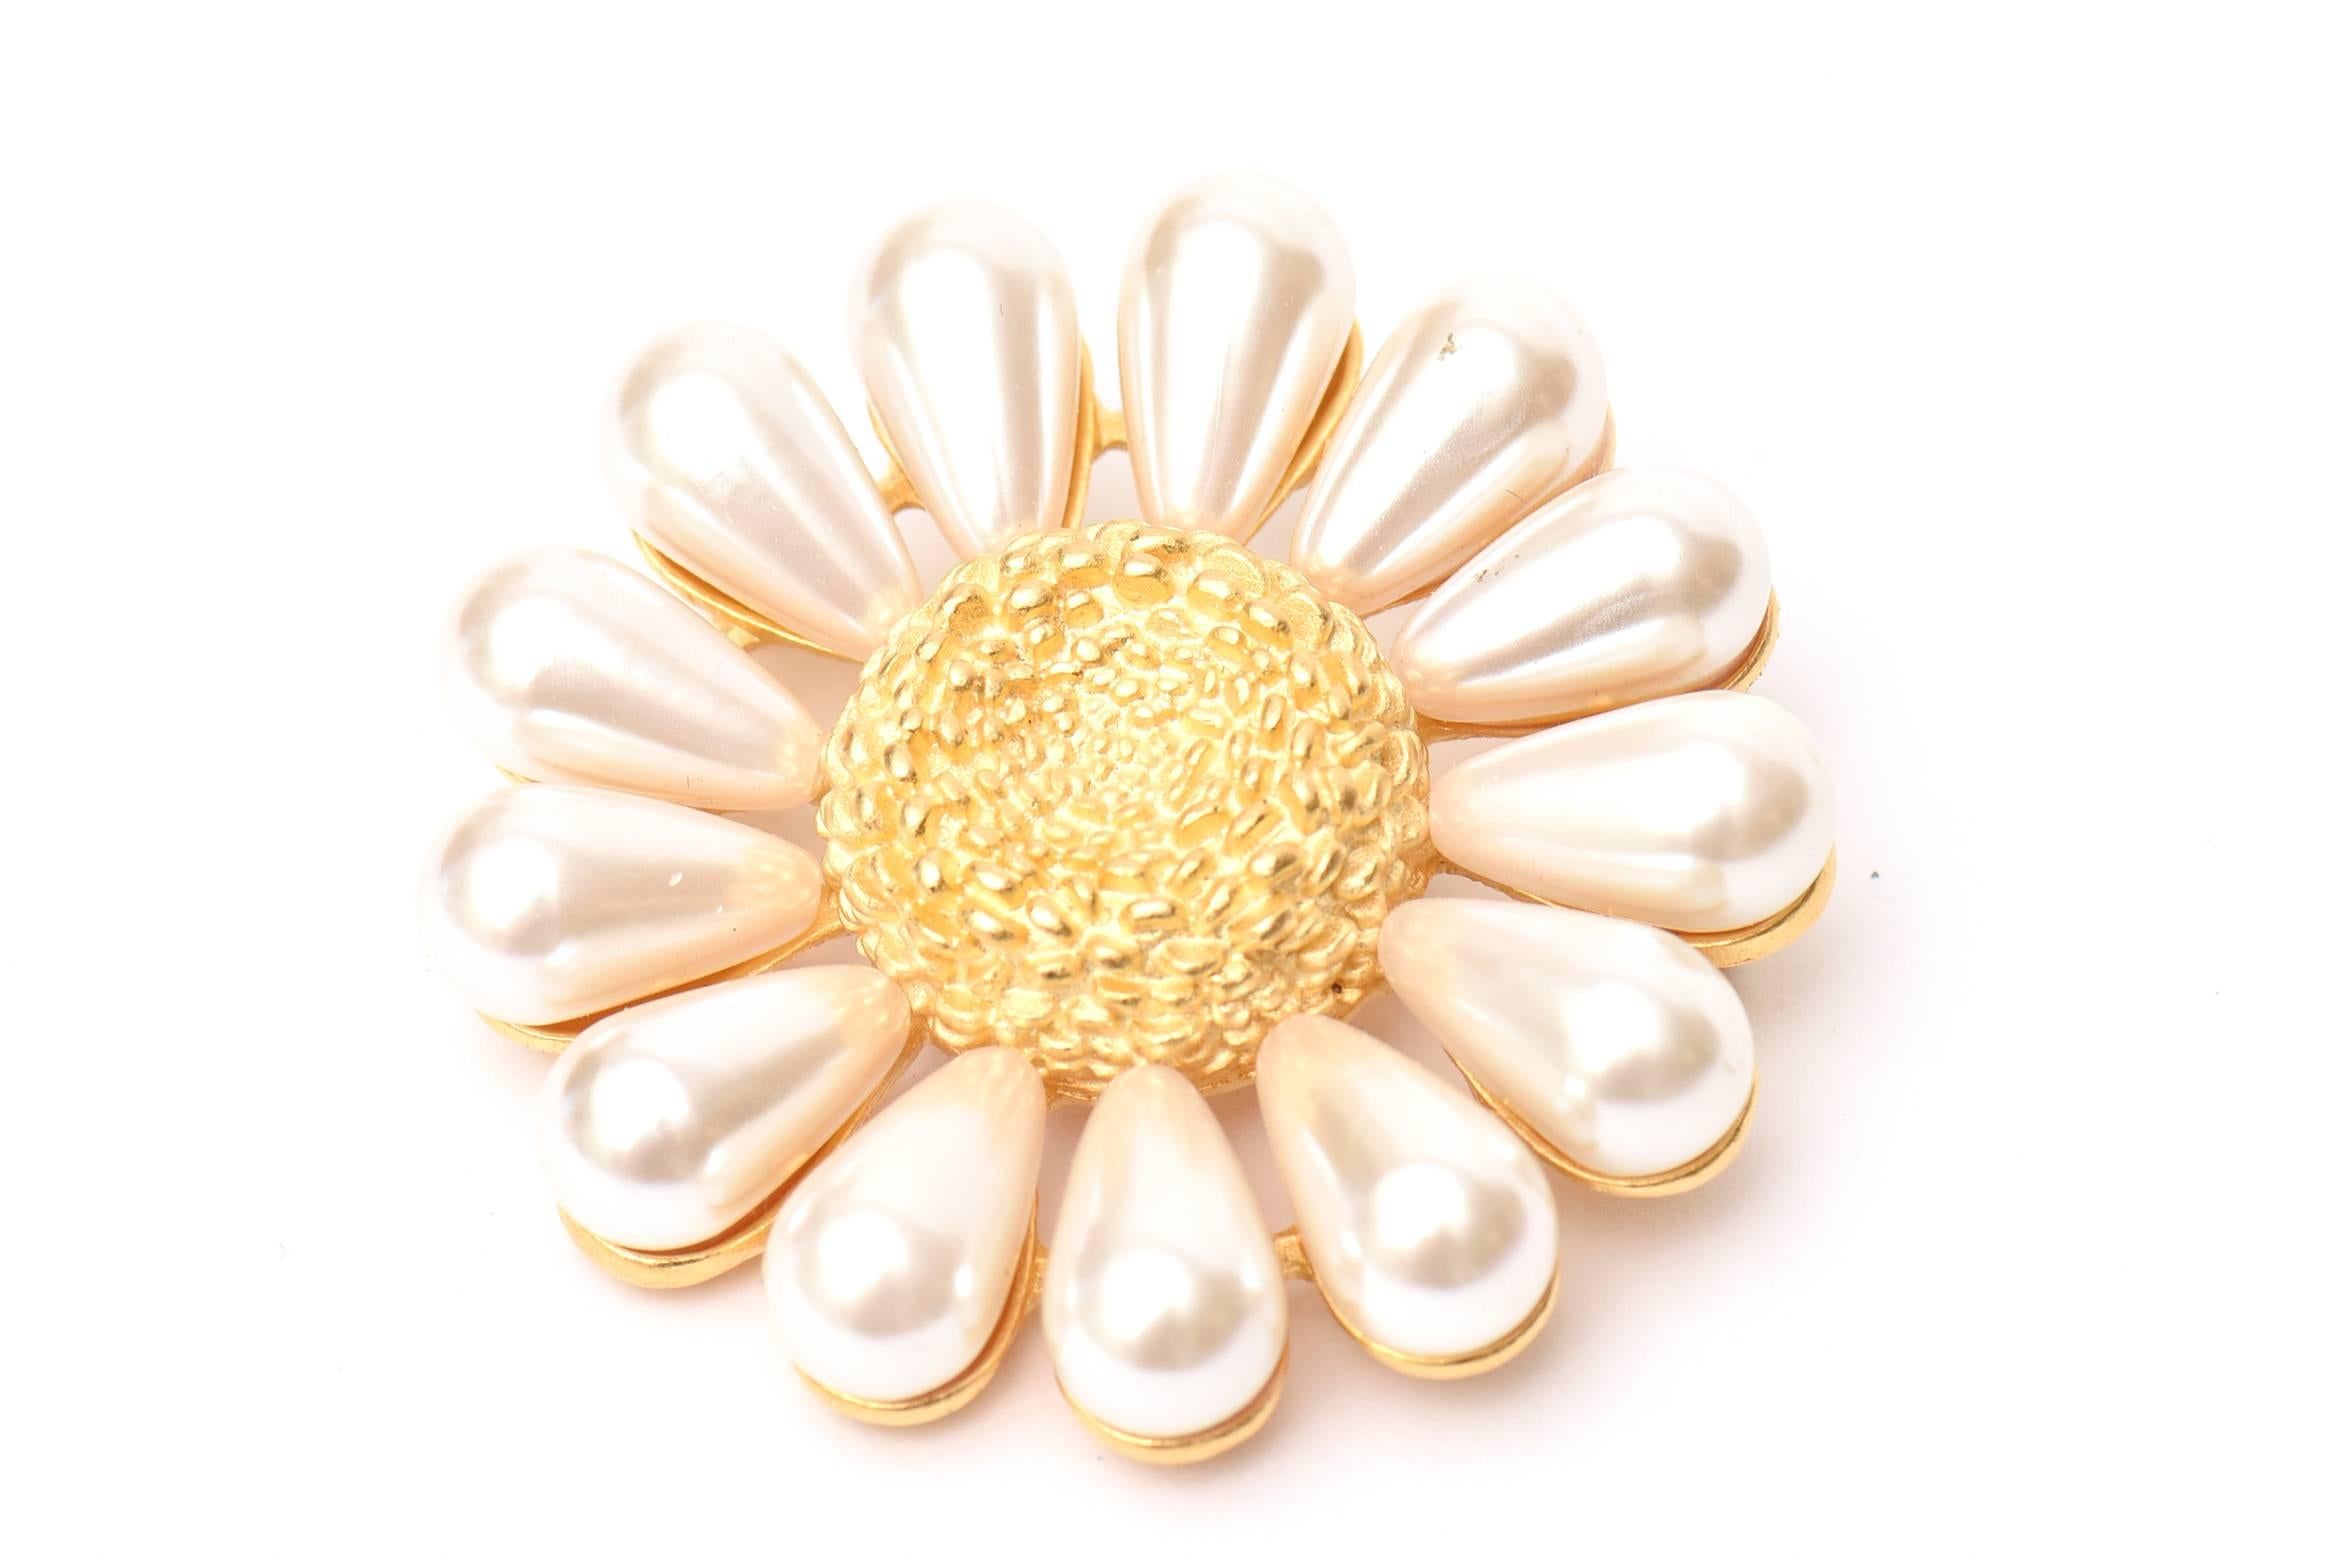 This lovely Givenchy pin is like a sunflower of faux pearls and gold plated metal. It is hallmarked 